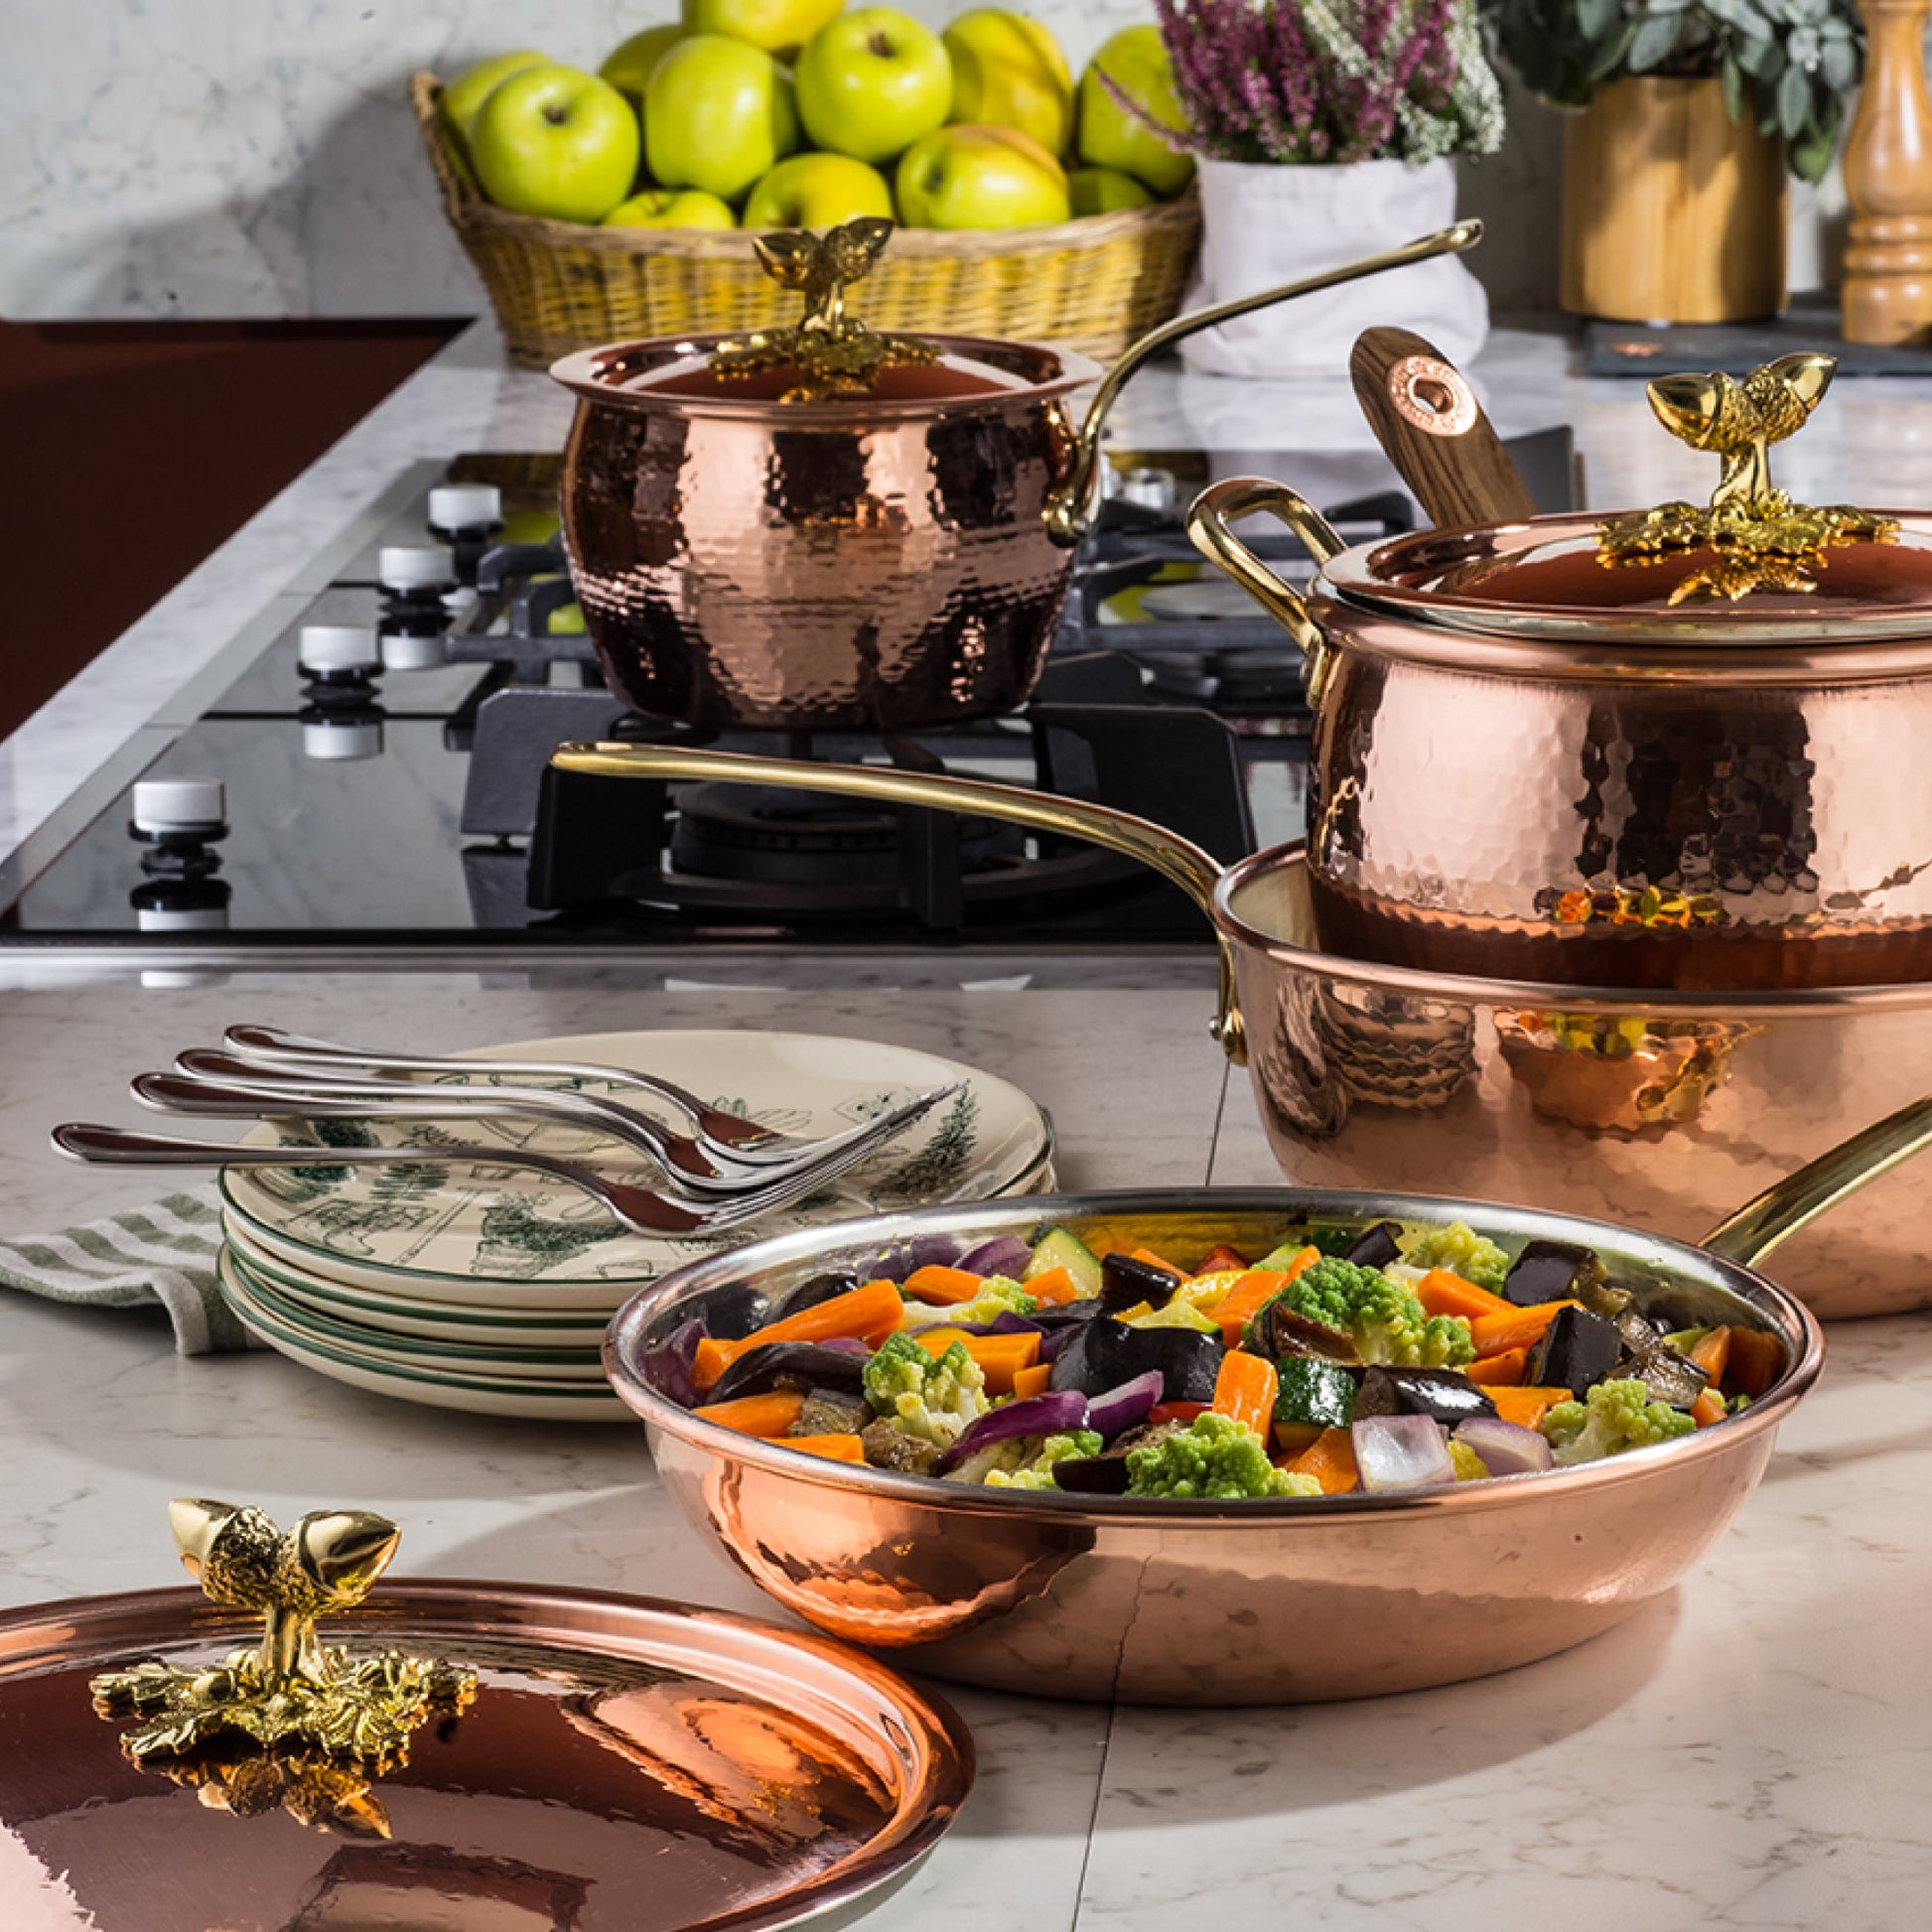 Hammered copper 5 Piece Set lined with high purity tin applied by hand over fire and bronze handles, from Ruffoni Historia collection